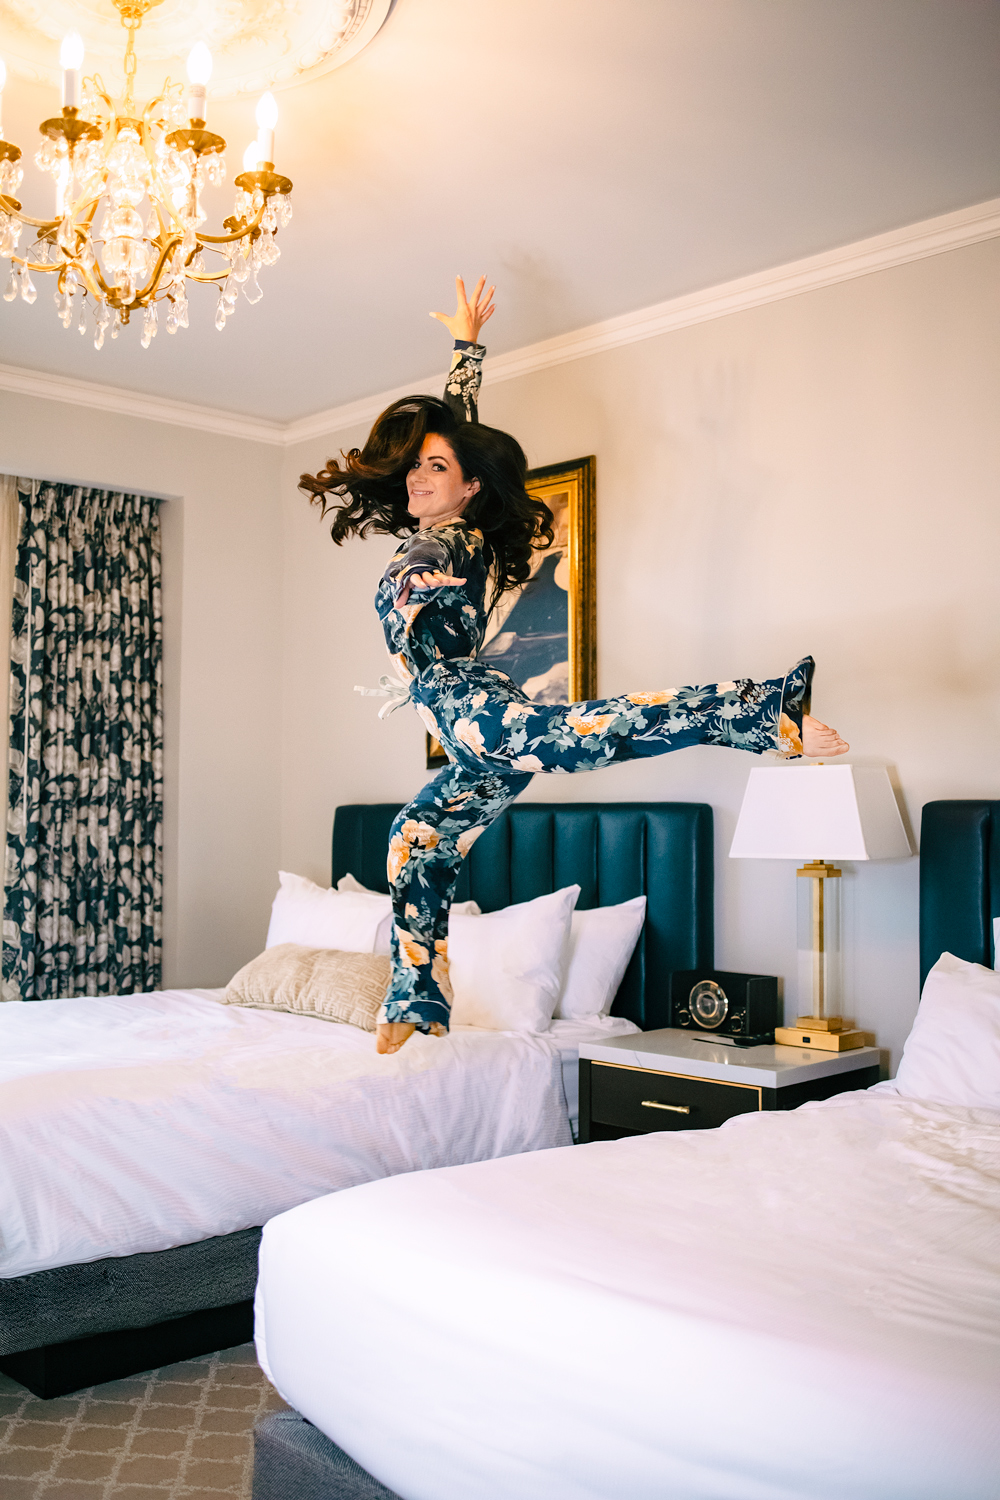 leaping over bed in pajamas